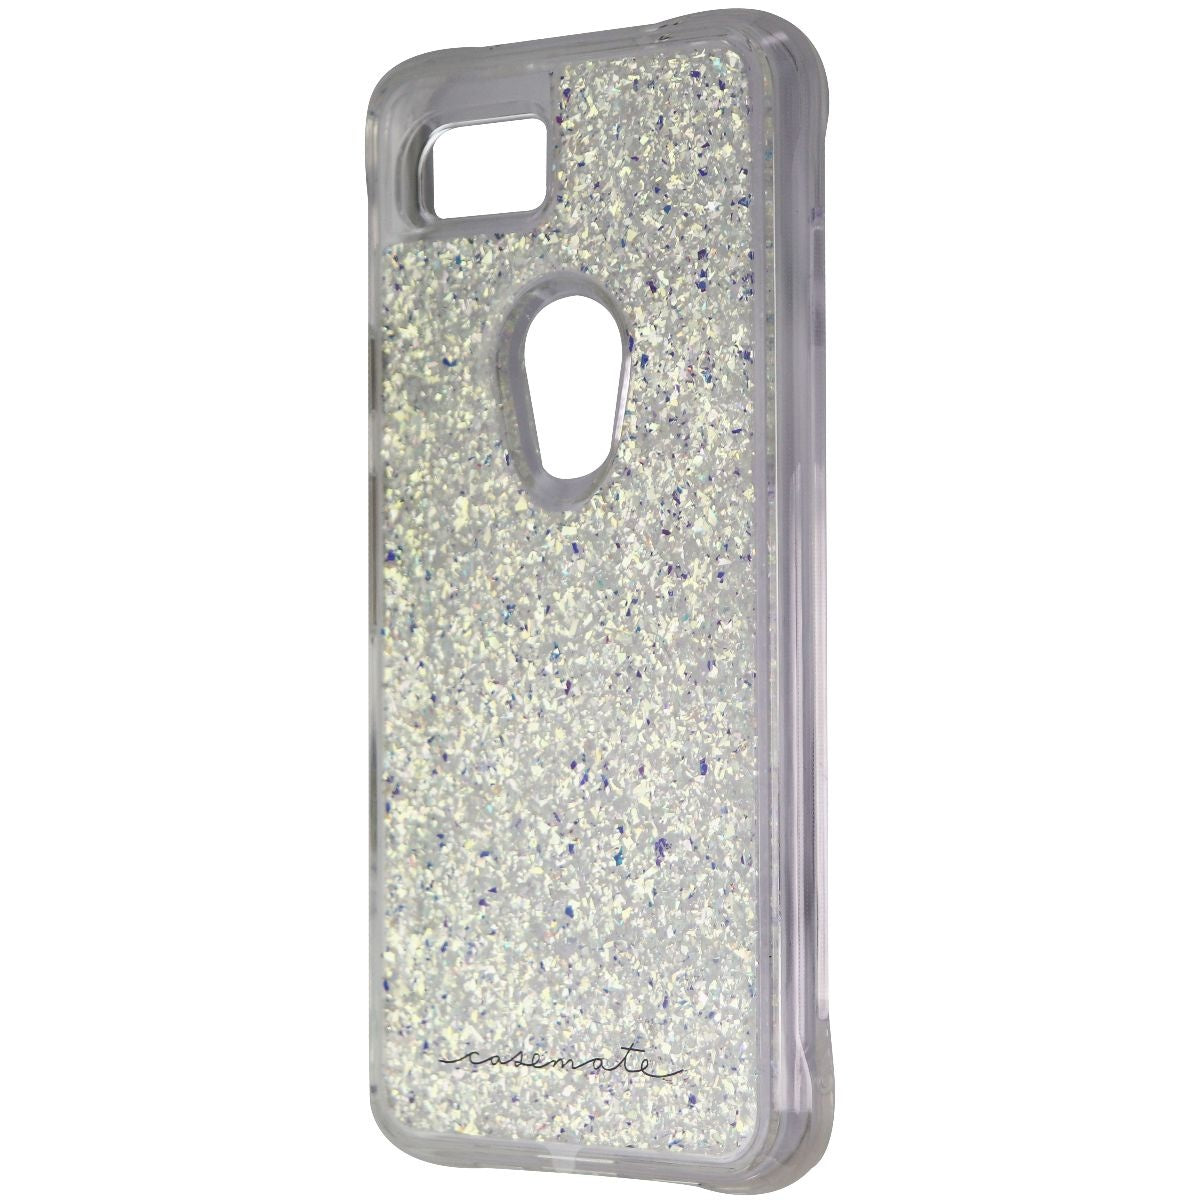 Case-Mate Twinkle Series Case for Google Pixel 3a - Stardust (Clear/Iridescent) Cell Phone - Cases, Covers & Skins Case-Mate    - Simple Cell Bulk Wholesale Pricing - USA Seller